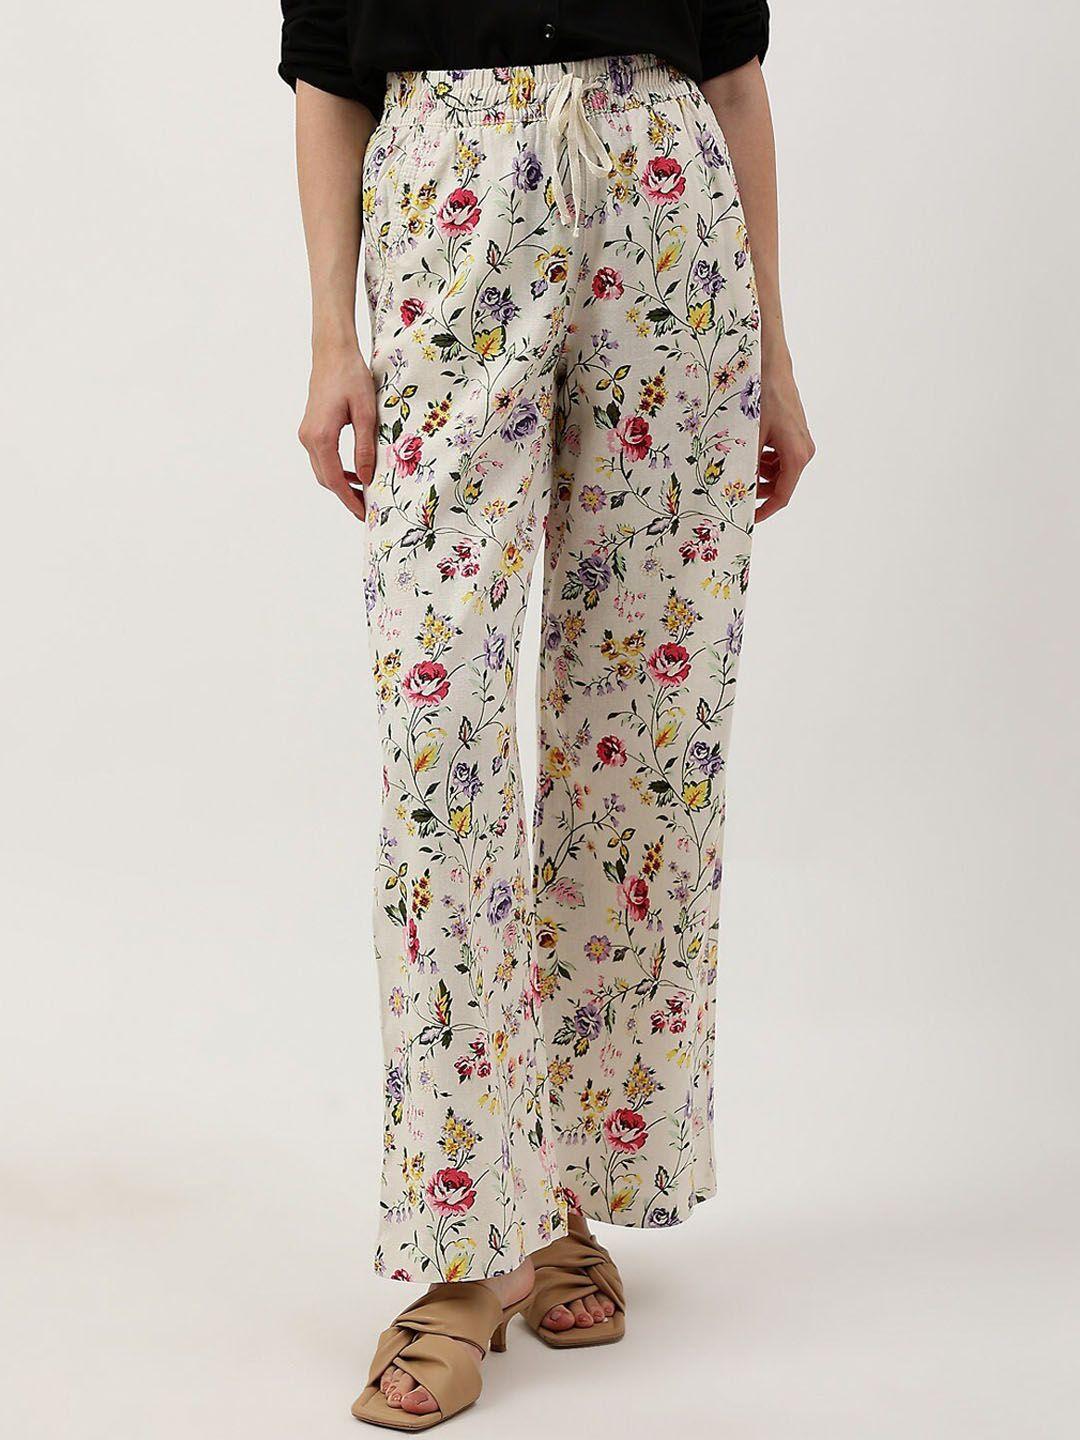 marks-&-spencer-women-floral-printed-high-rise-trouser